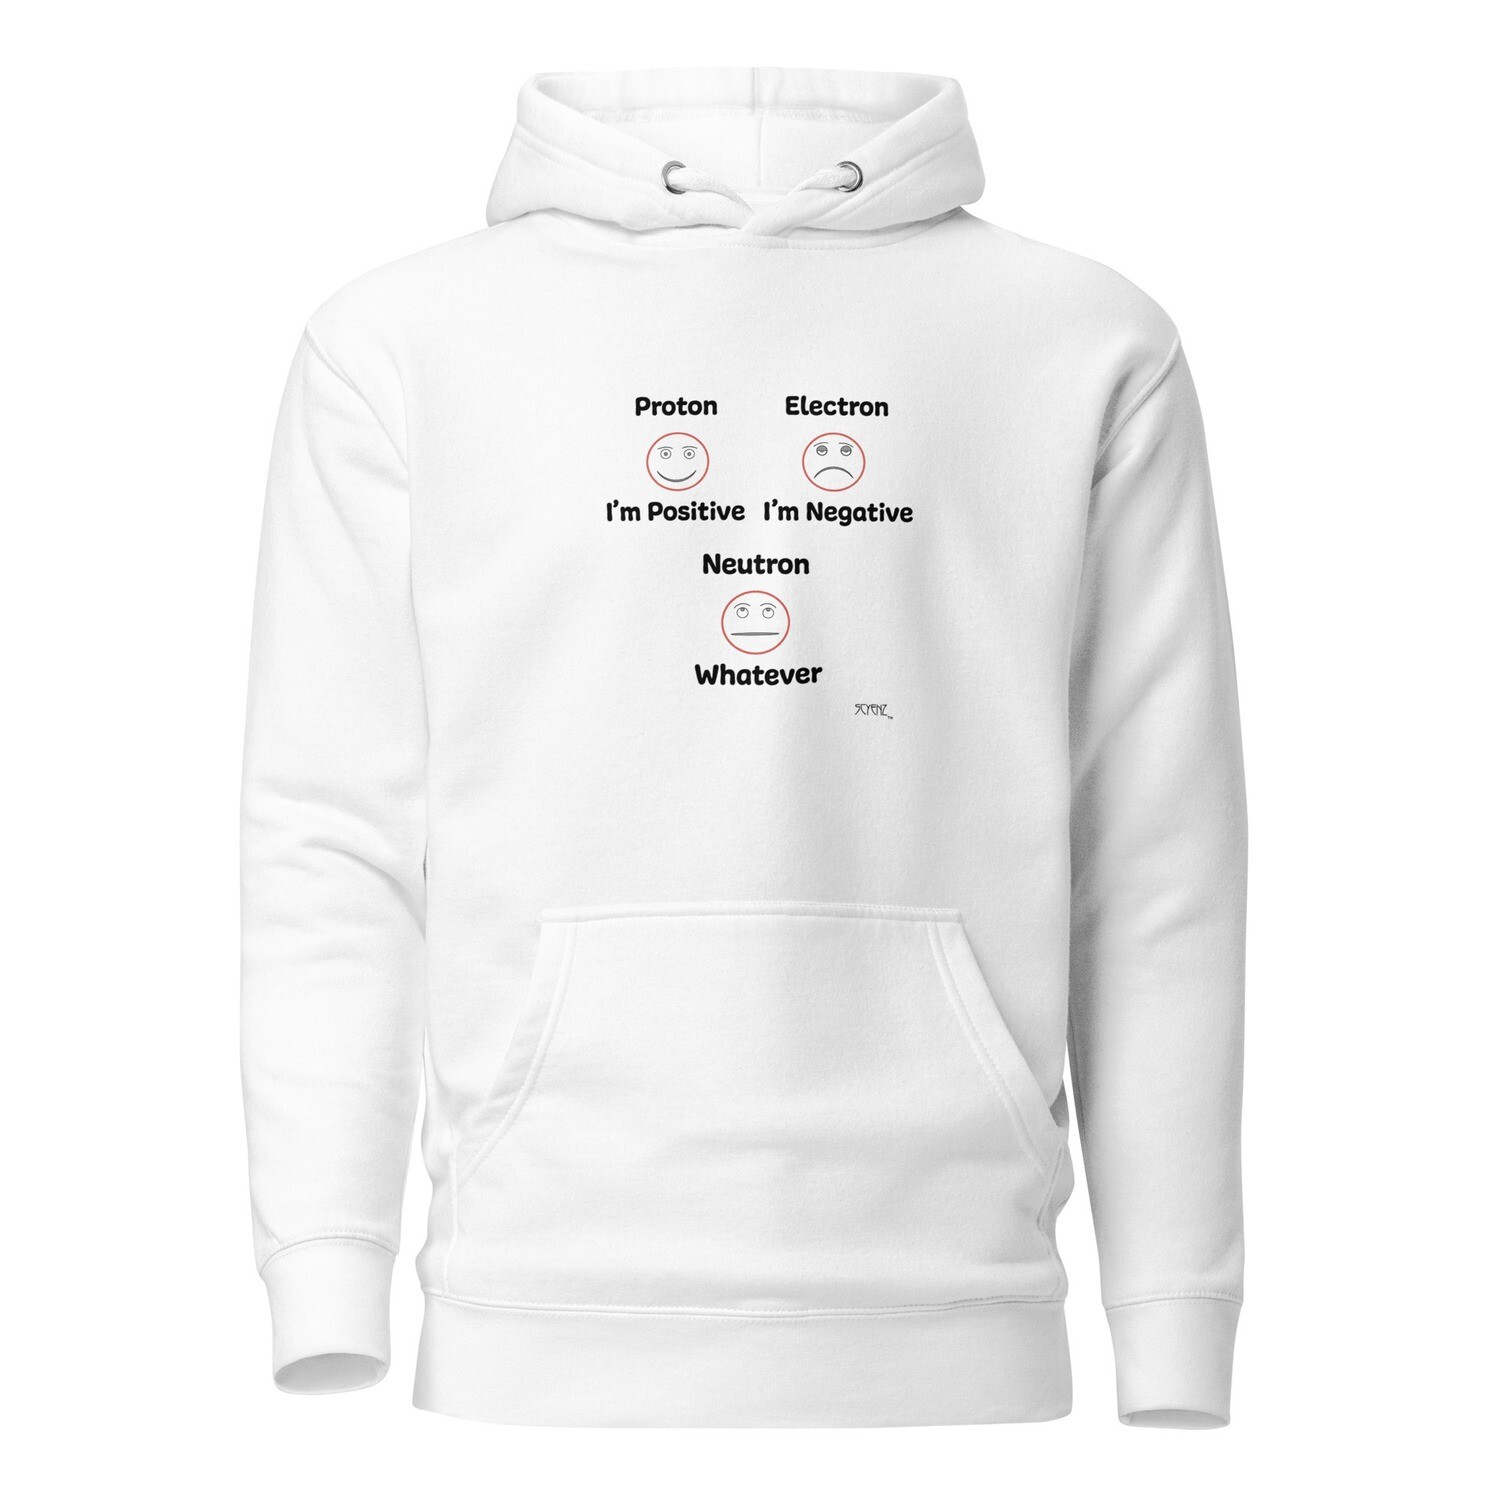 Neutron_Whatever SCYENZ Unisex Hoodie - Science and Math Collection